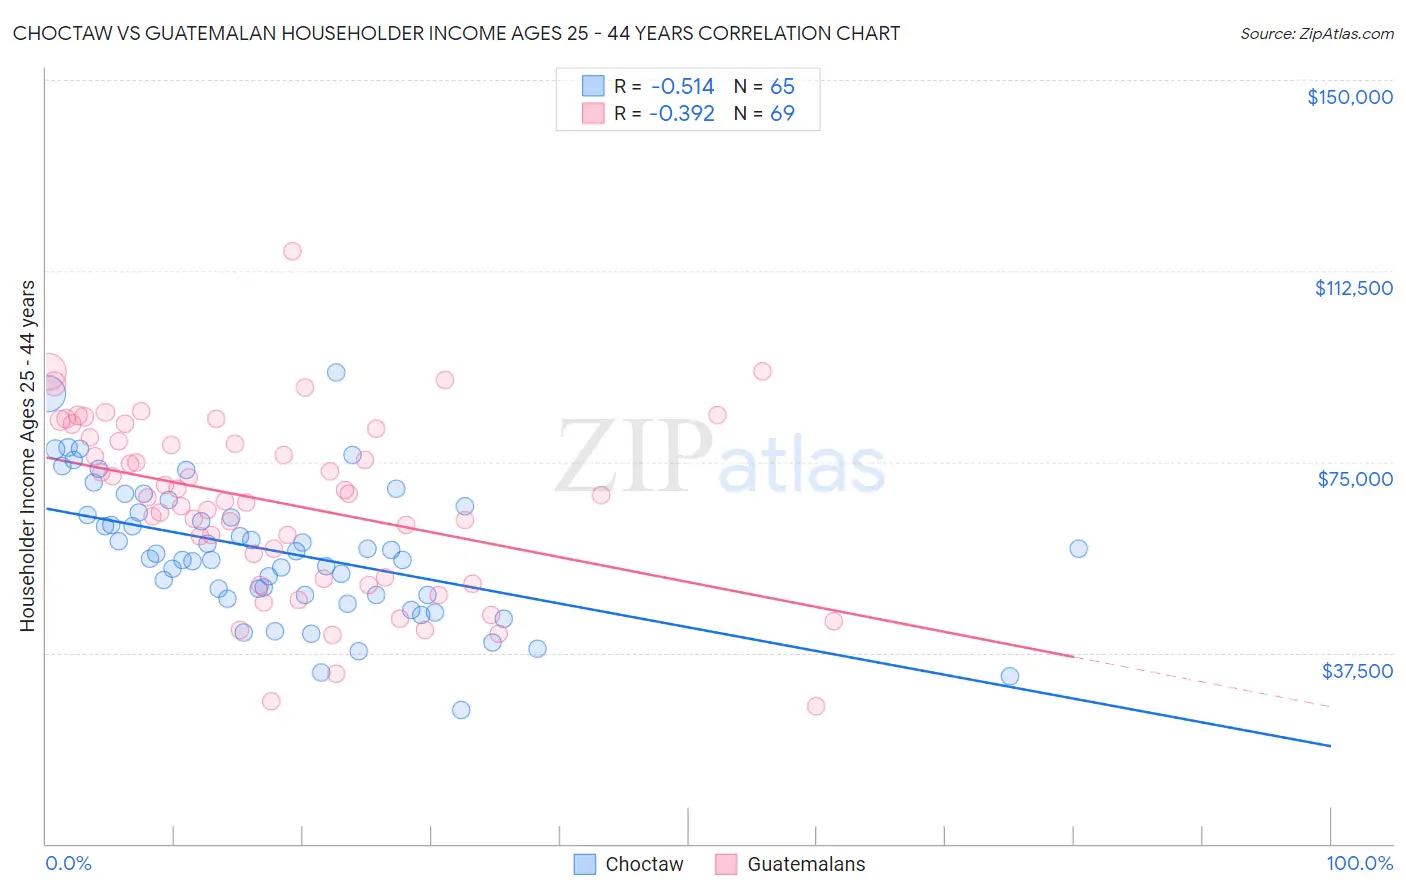 Choctaw vs Guatemalan Householder Income Ages 25 - 44 years